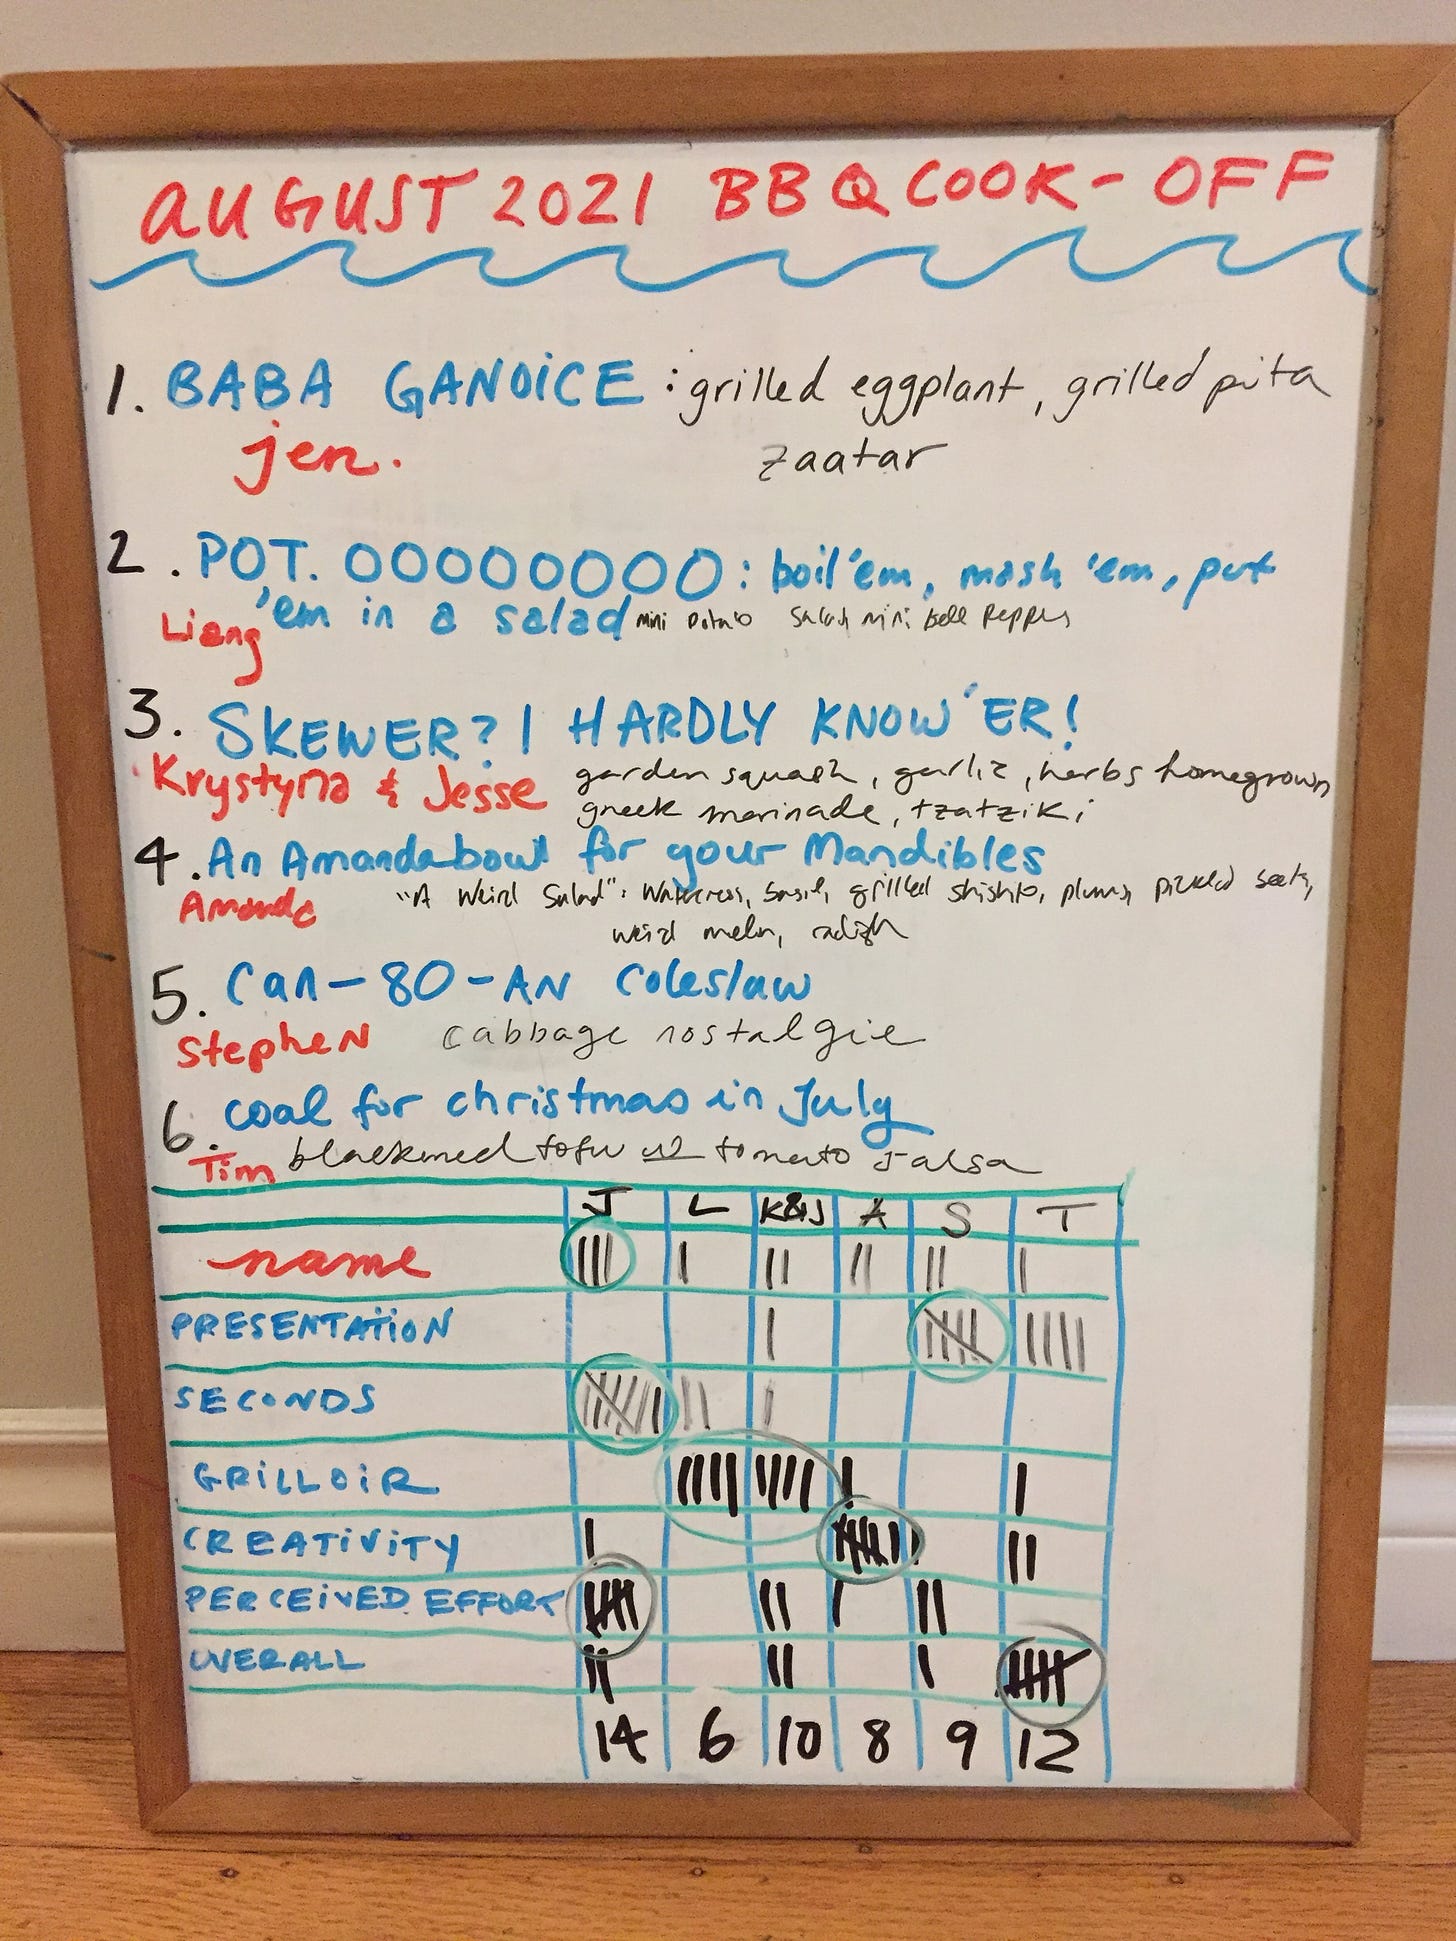 A whiteboard with a list of cookoff entries. The scoring categories are at the bottom: name, presentation, seconds, grilloir, creativity, perceived effort, and overall favourite.